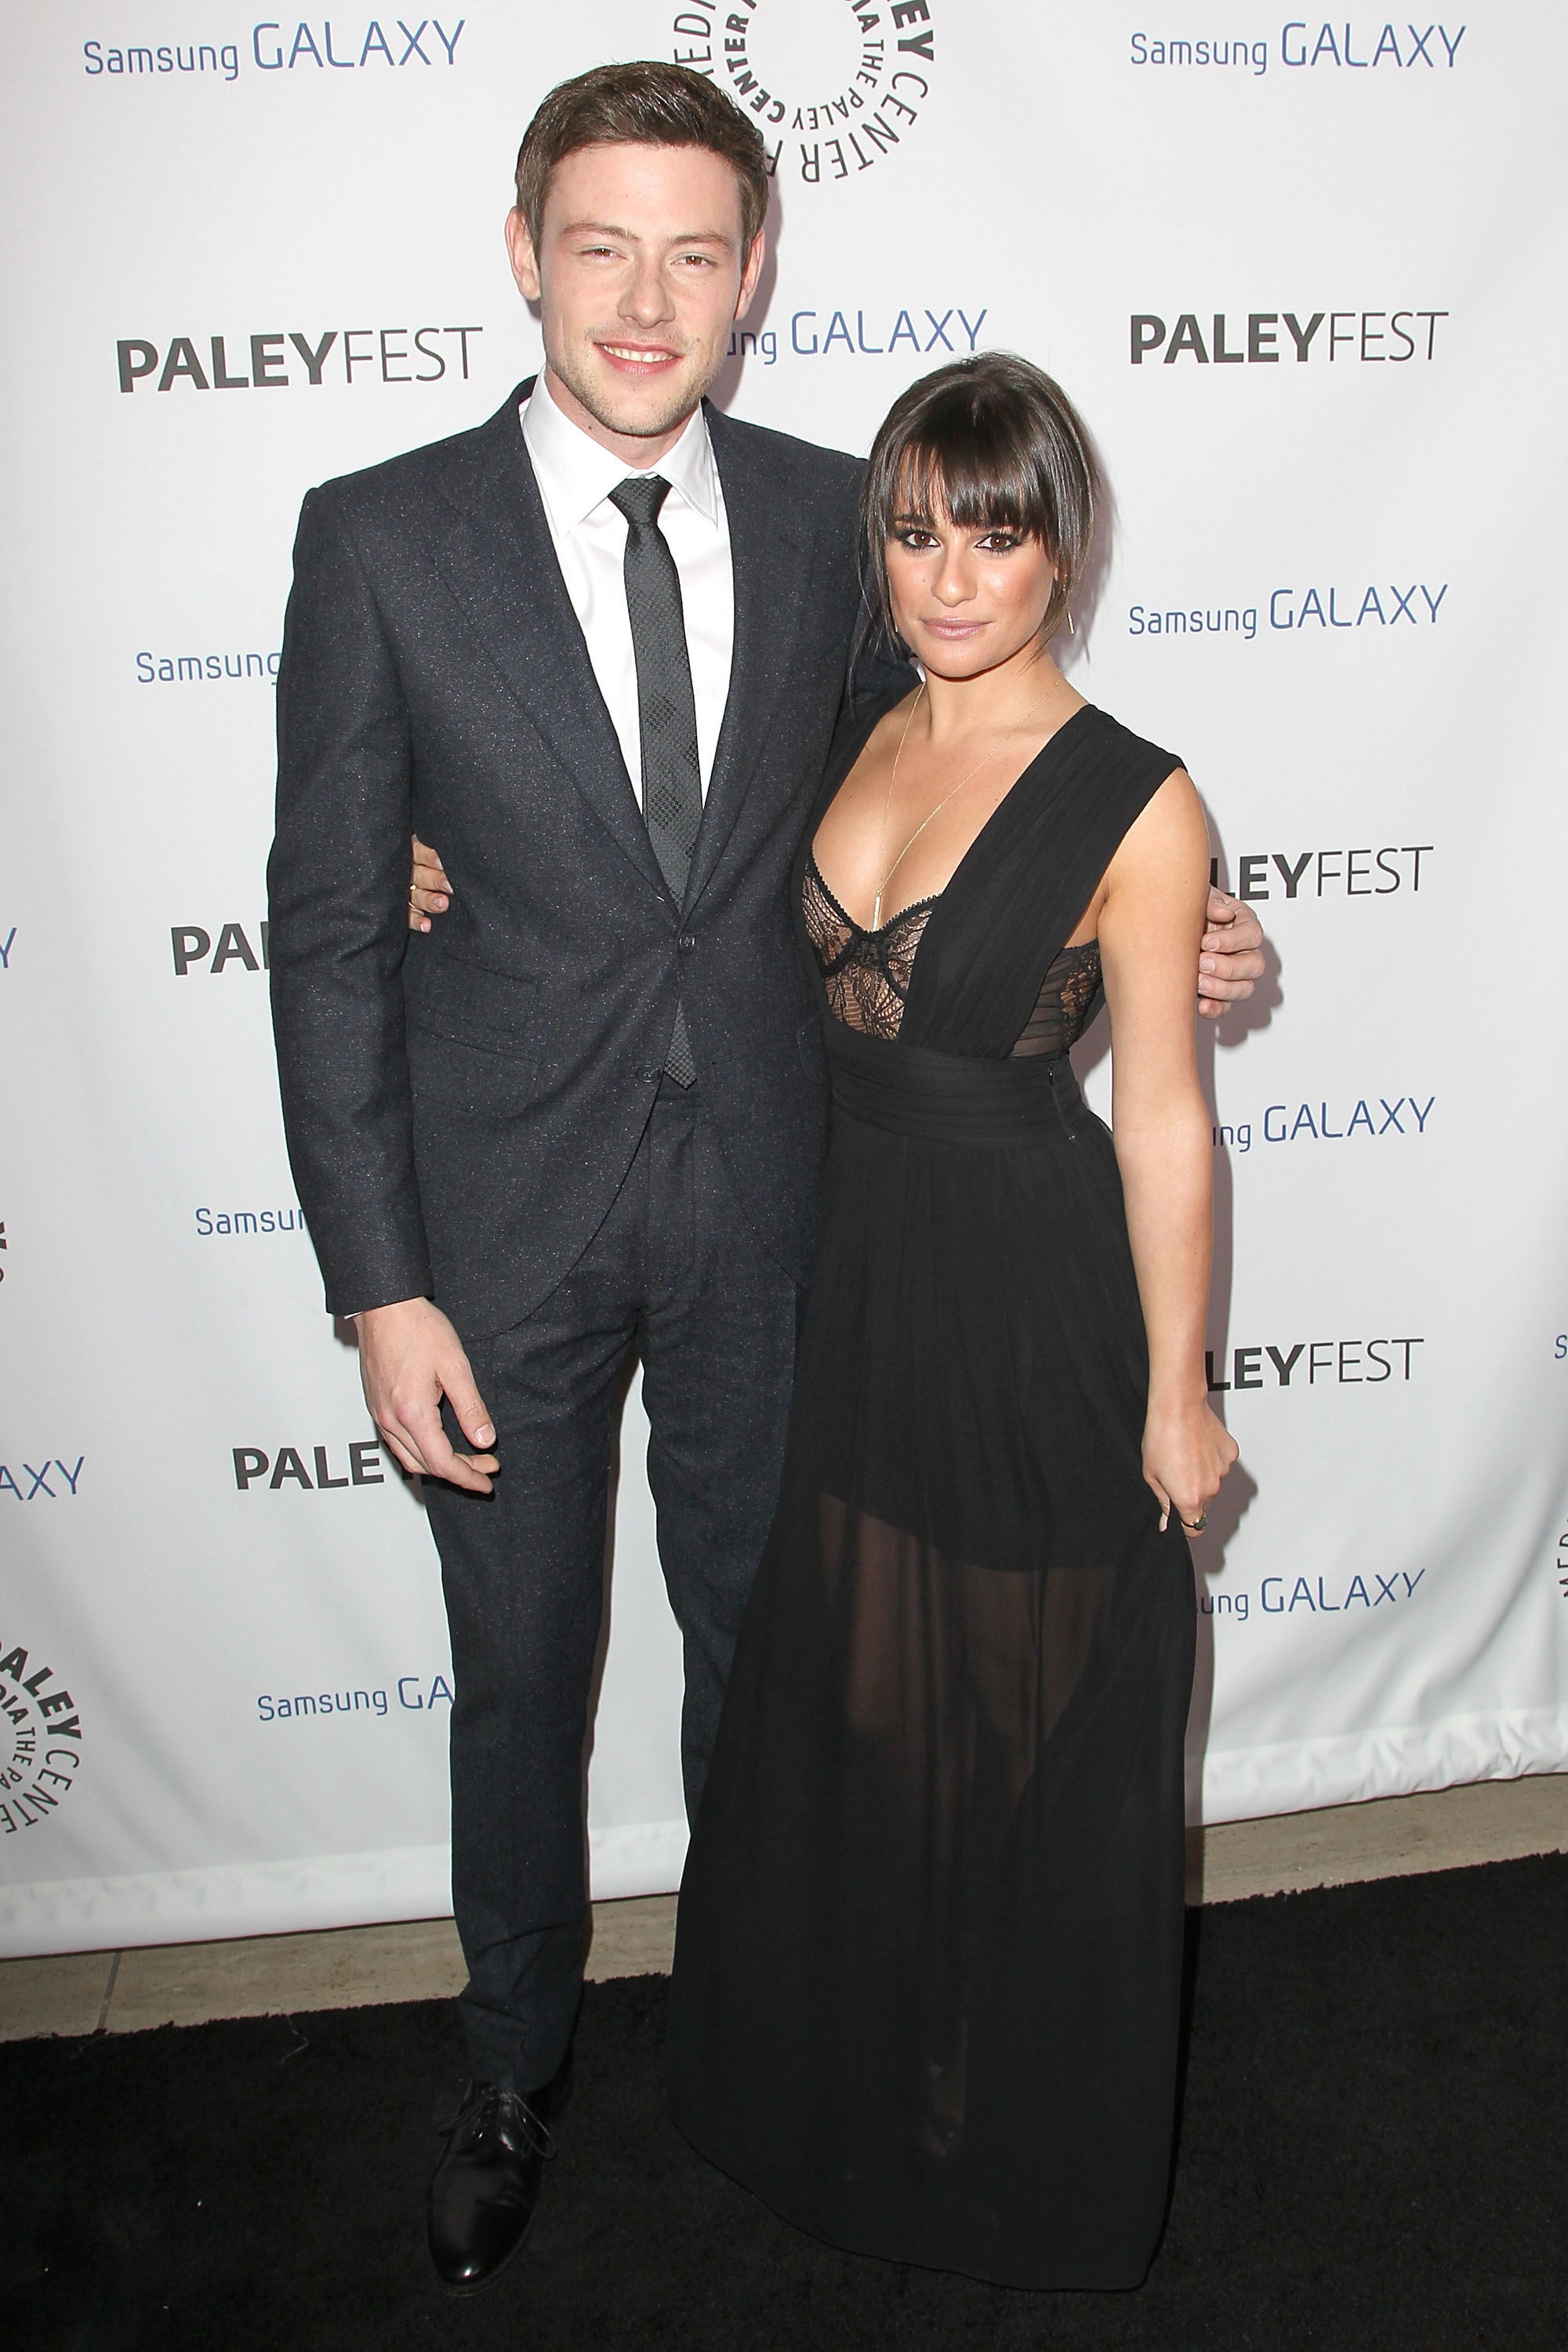 Cory and Lea pose together fat a red carpet event for photographers